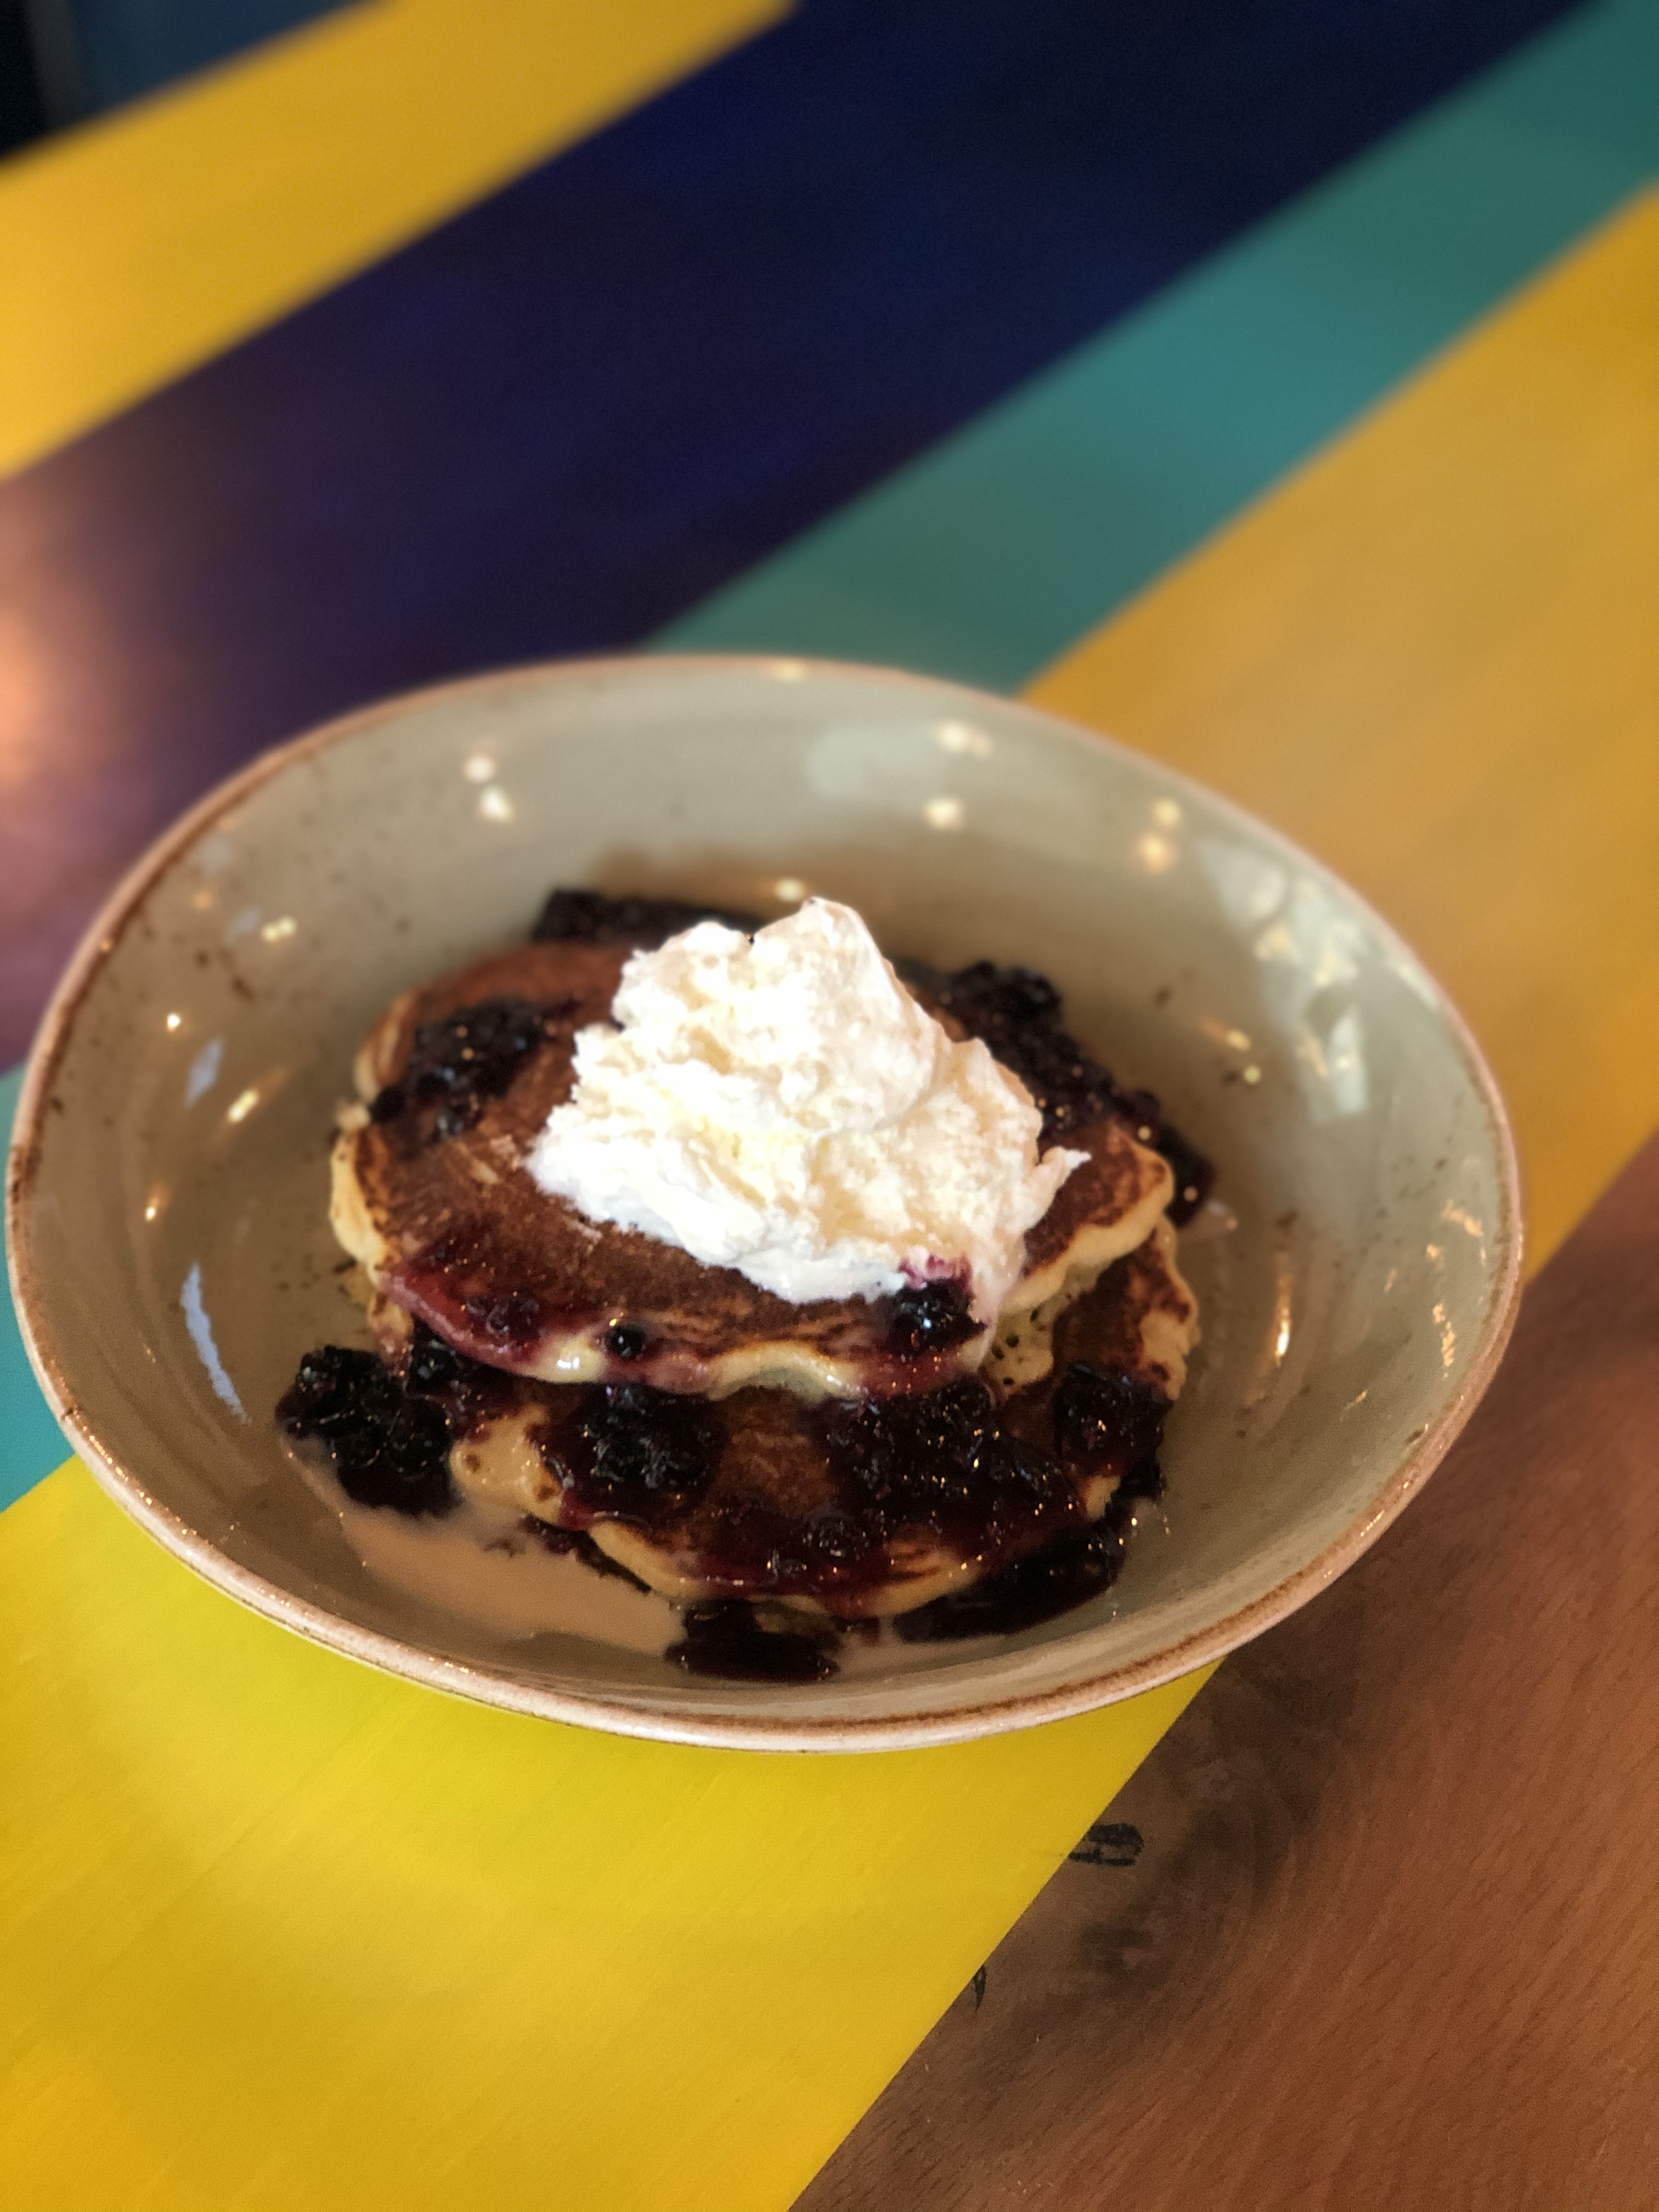 Panqueques, or pancakes, joins the brunch menu at Coche Comedor. 